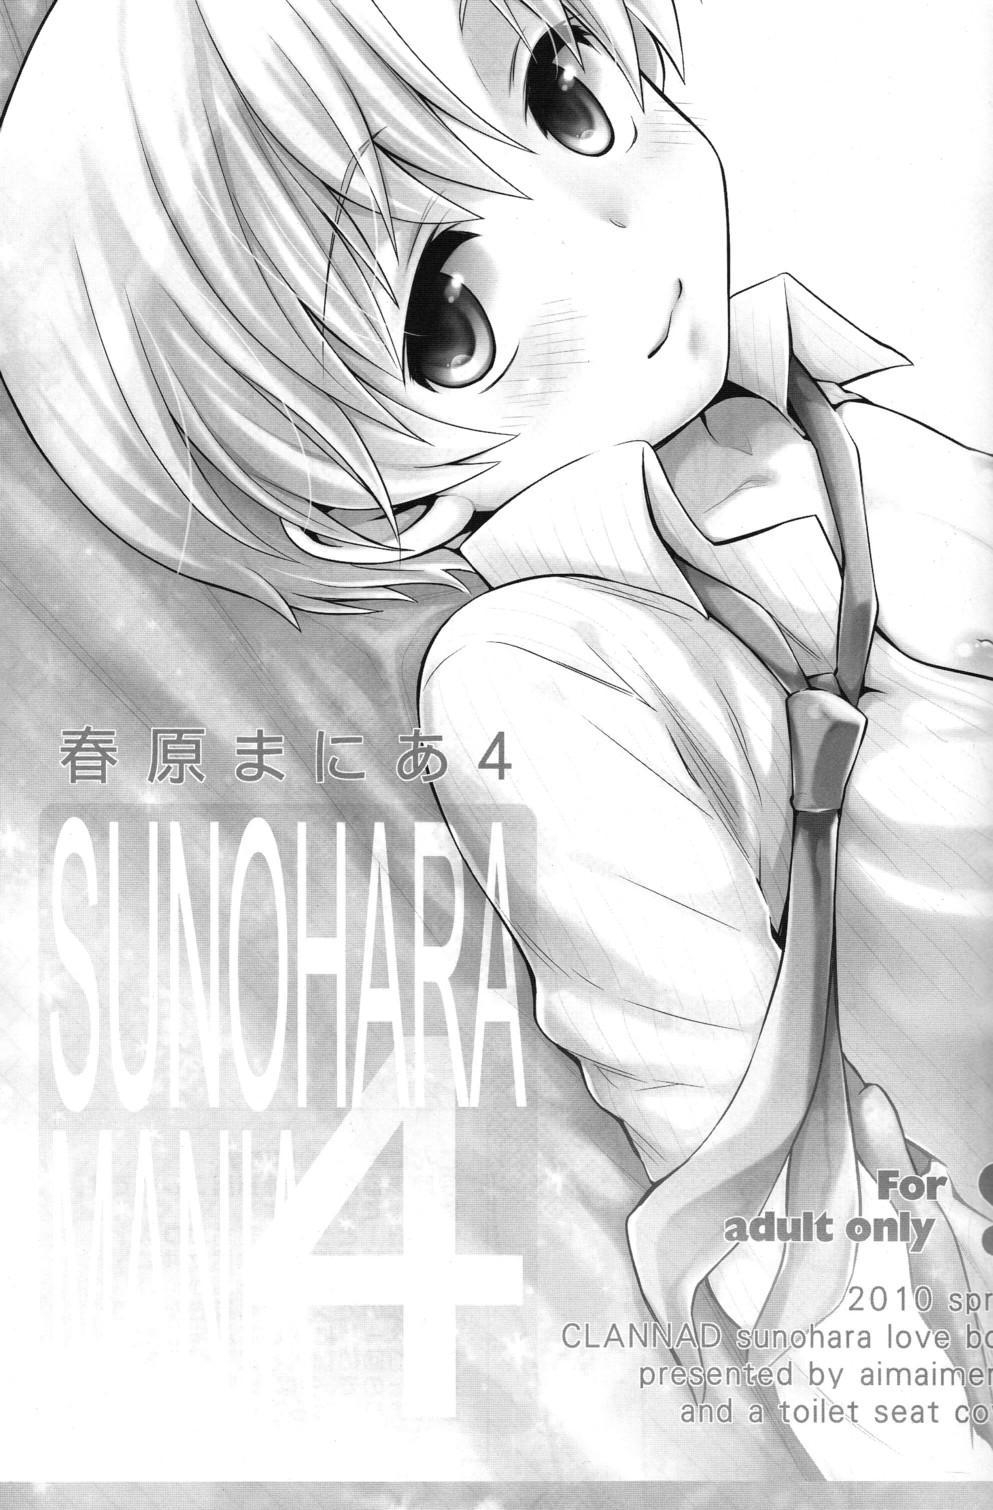 Swinger Sunohara Mania 4 - Clannad Shaved Pussy - Page 3